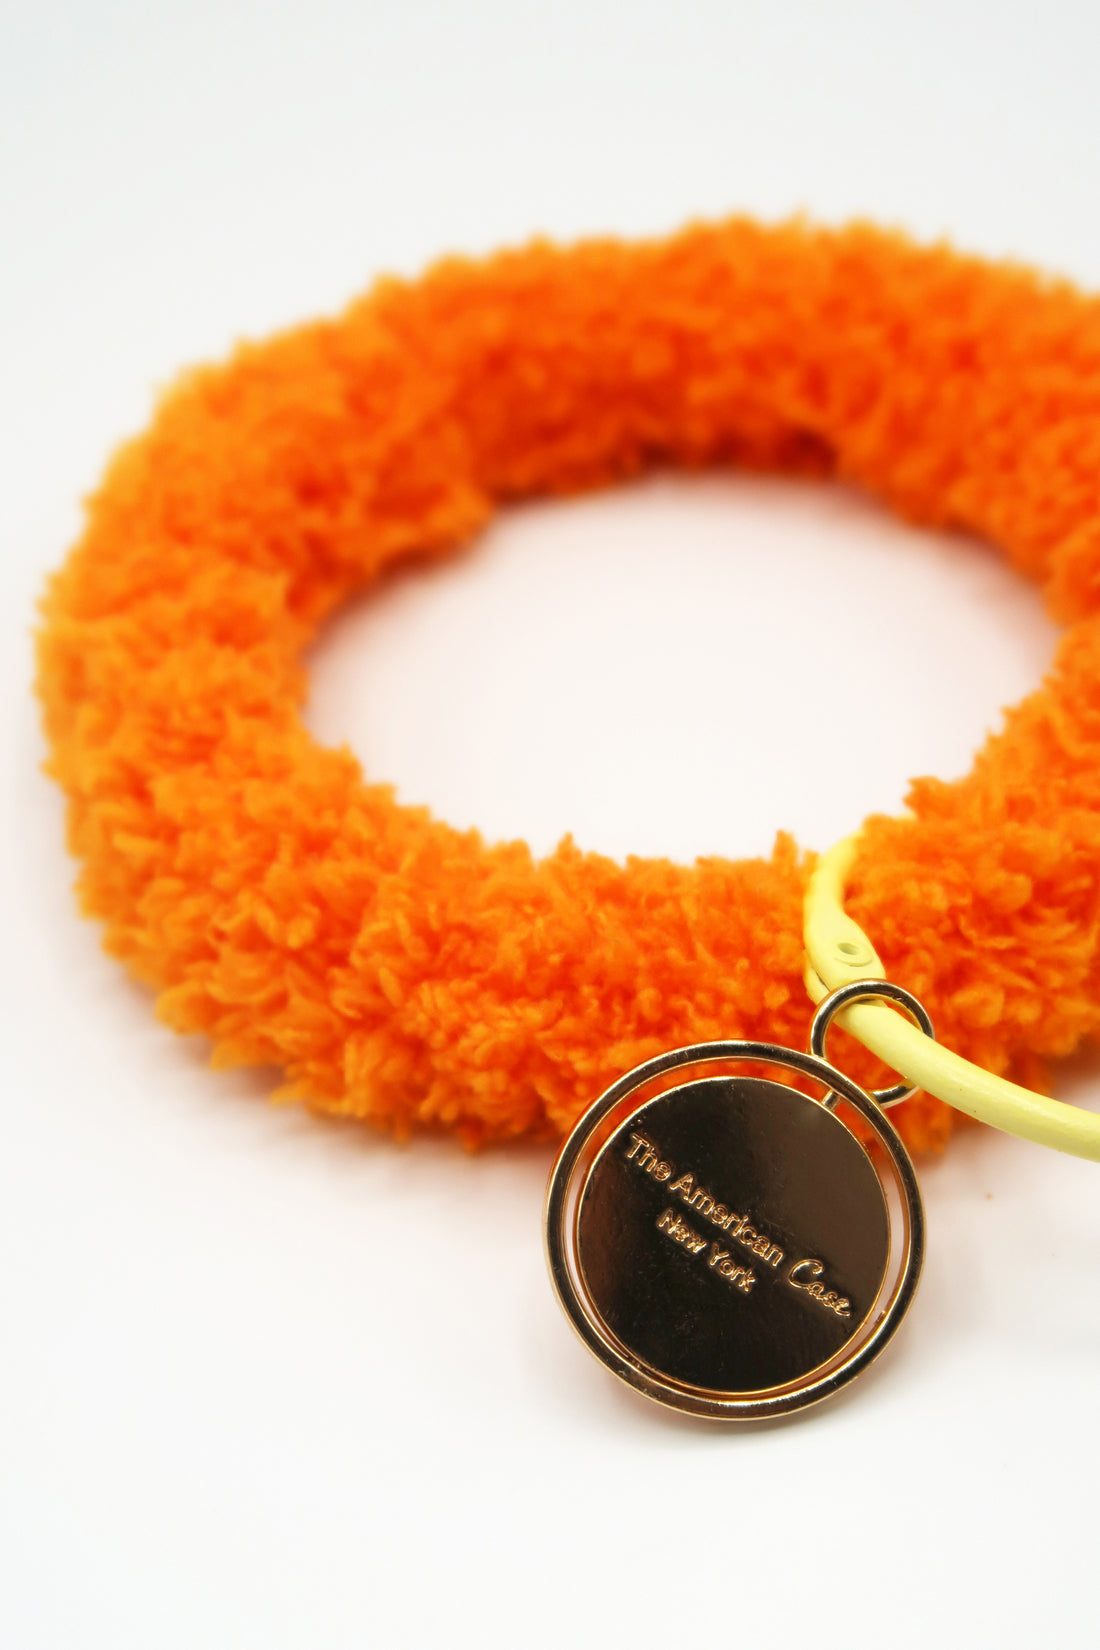 Carmen- Fuzzy Donut Ring with Golden Carabiners